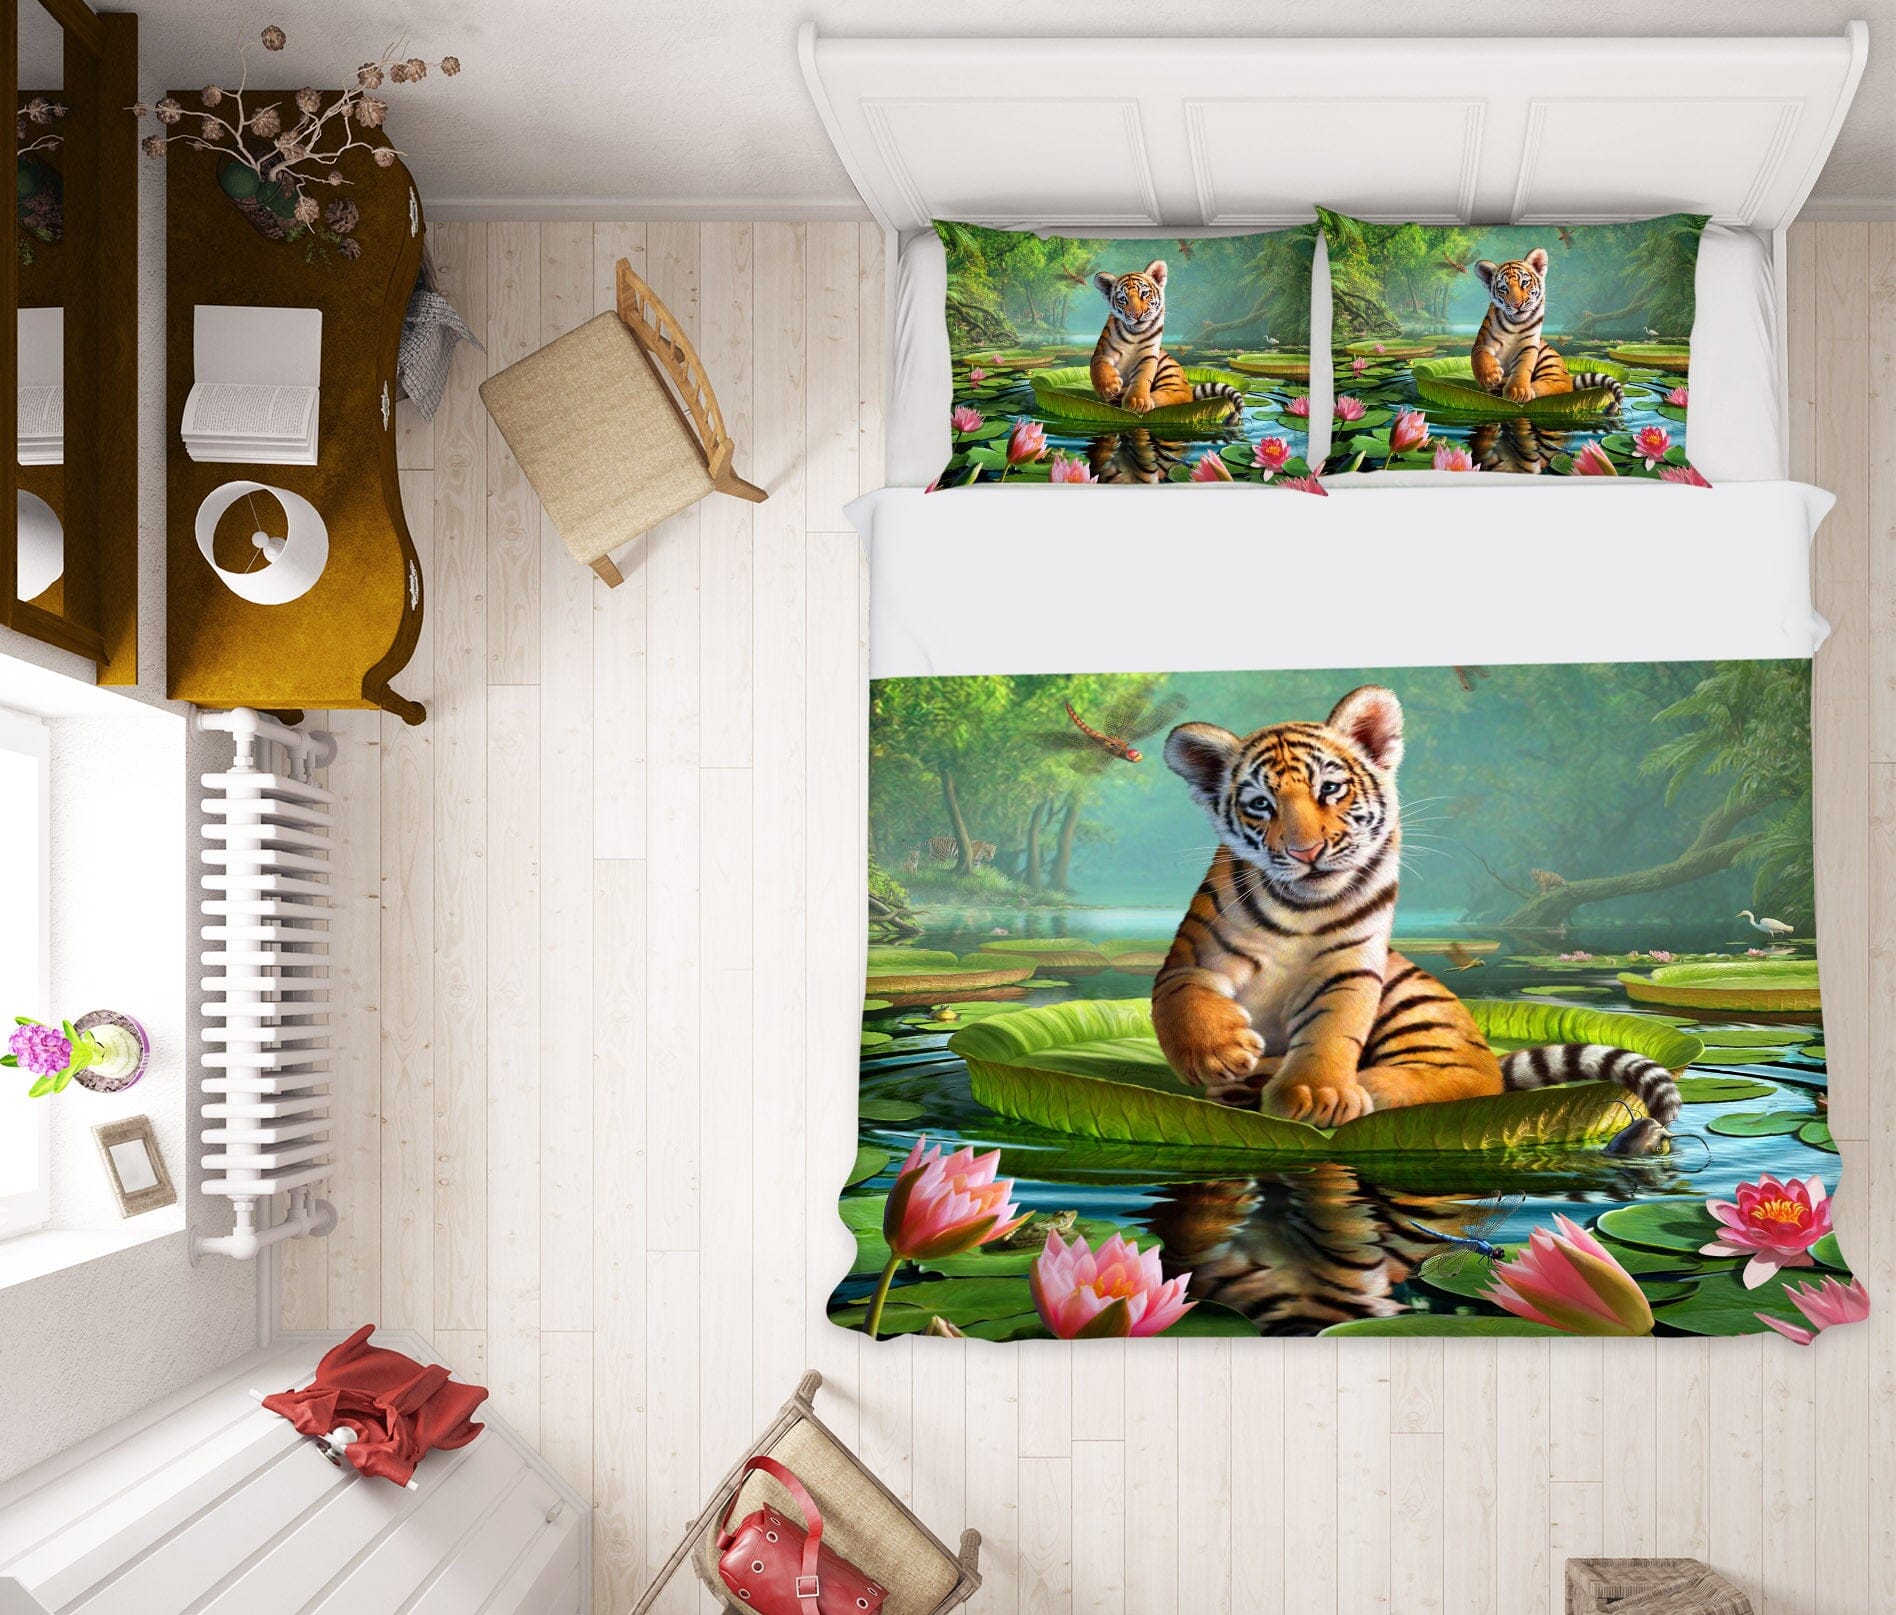 3D Tiger Lily 2109 Jerry LoFaro bedding Bed Pillowcases Quilt Quiet Covers AJ Creativity Home 